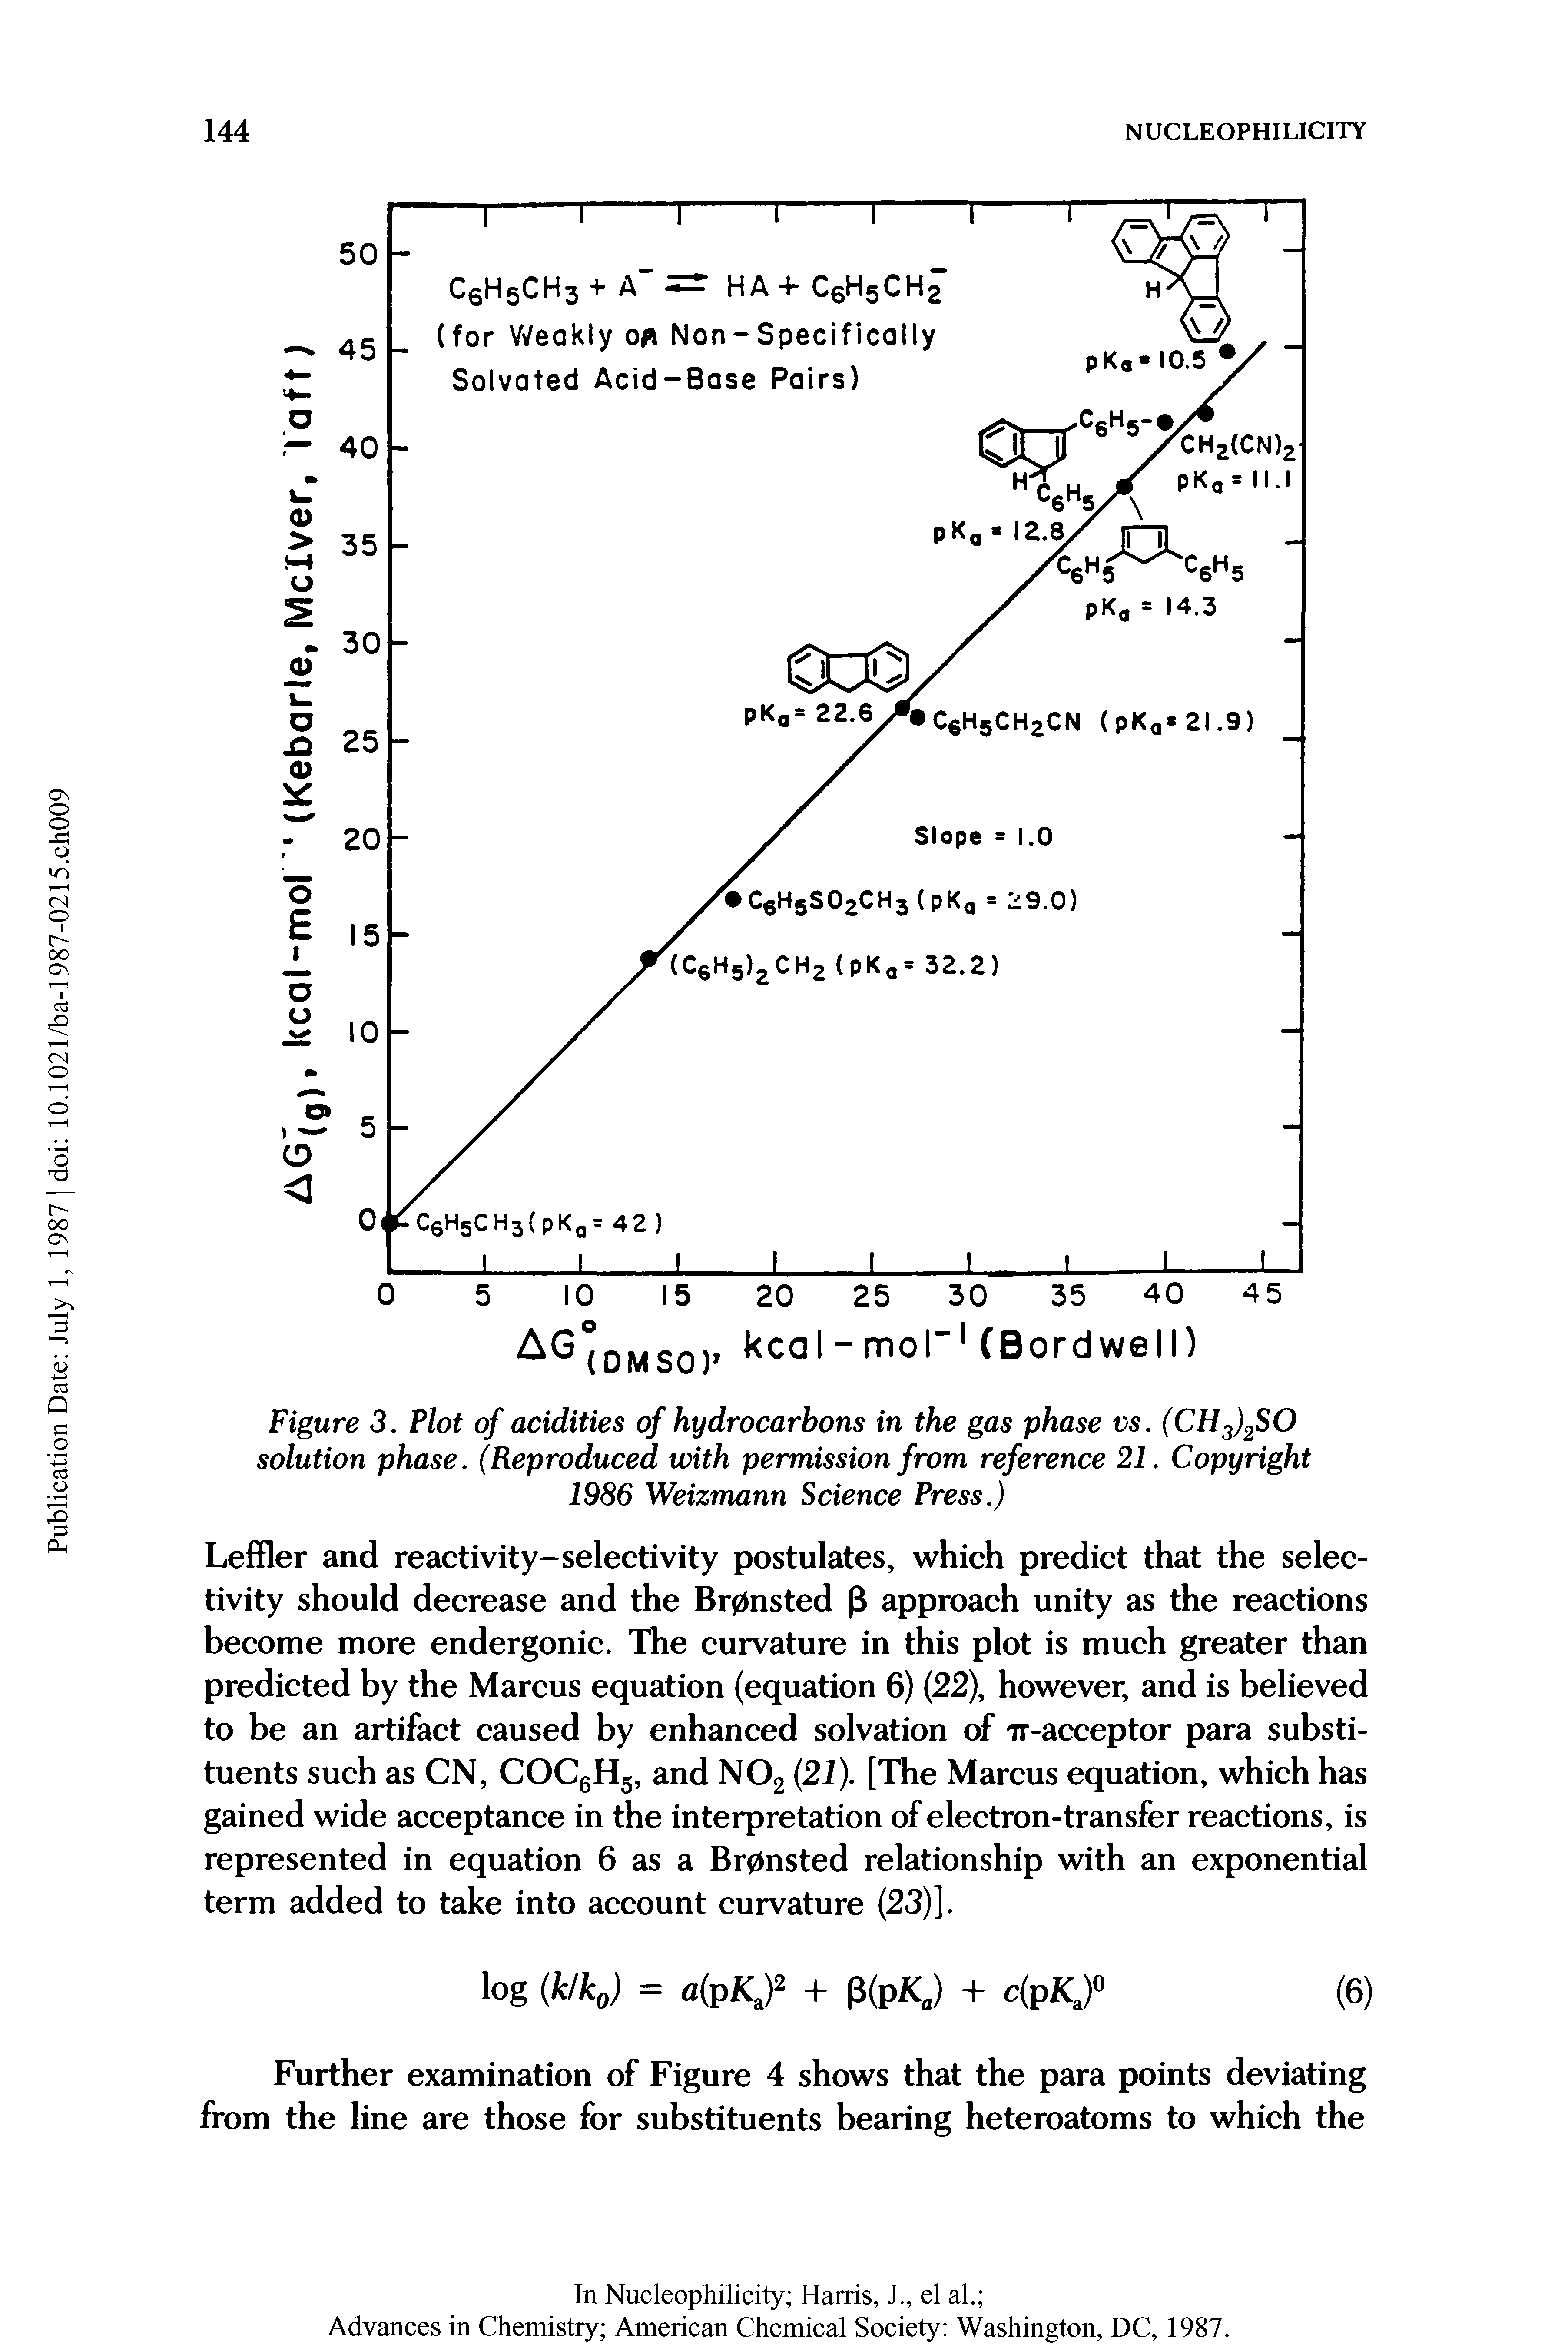 Figure 3. Plot of acidities of hydrocarbons in the gas phase vs. (CH3)2SO solution phase. (Reproduced with permission from reference 21. Copyright 1986 Weizmann Science Press.)...